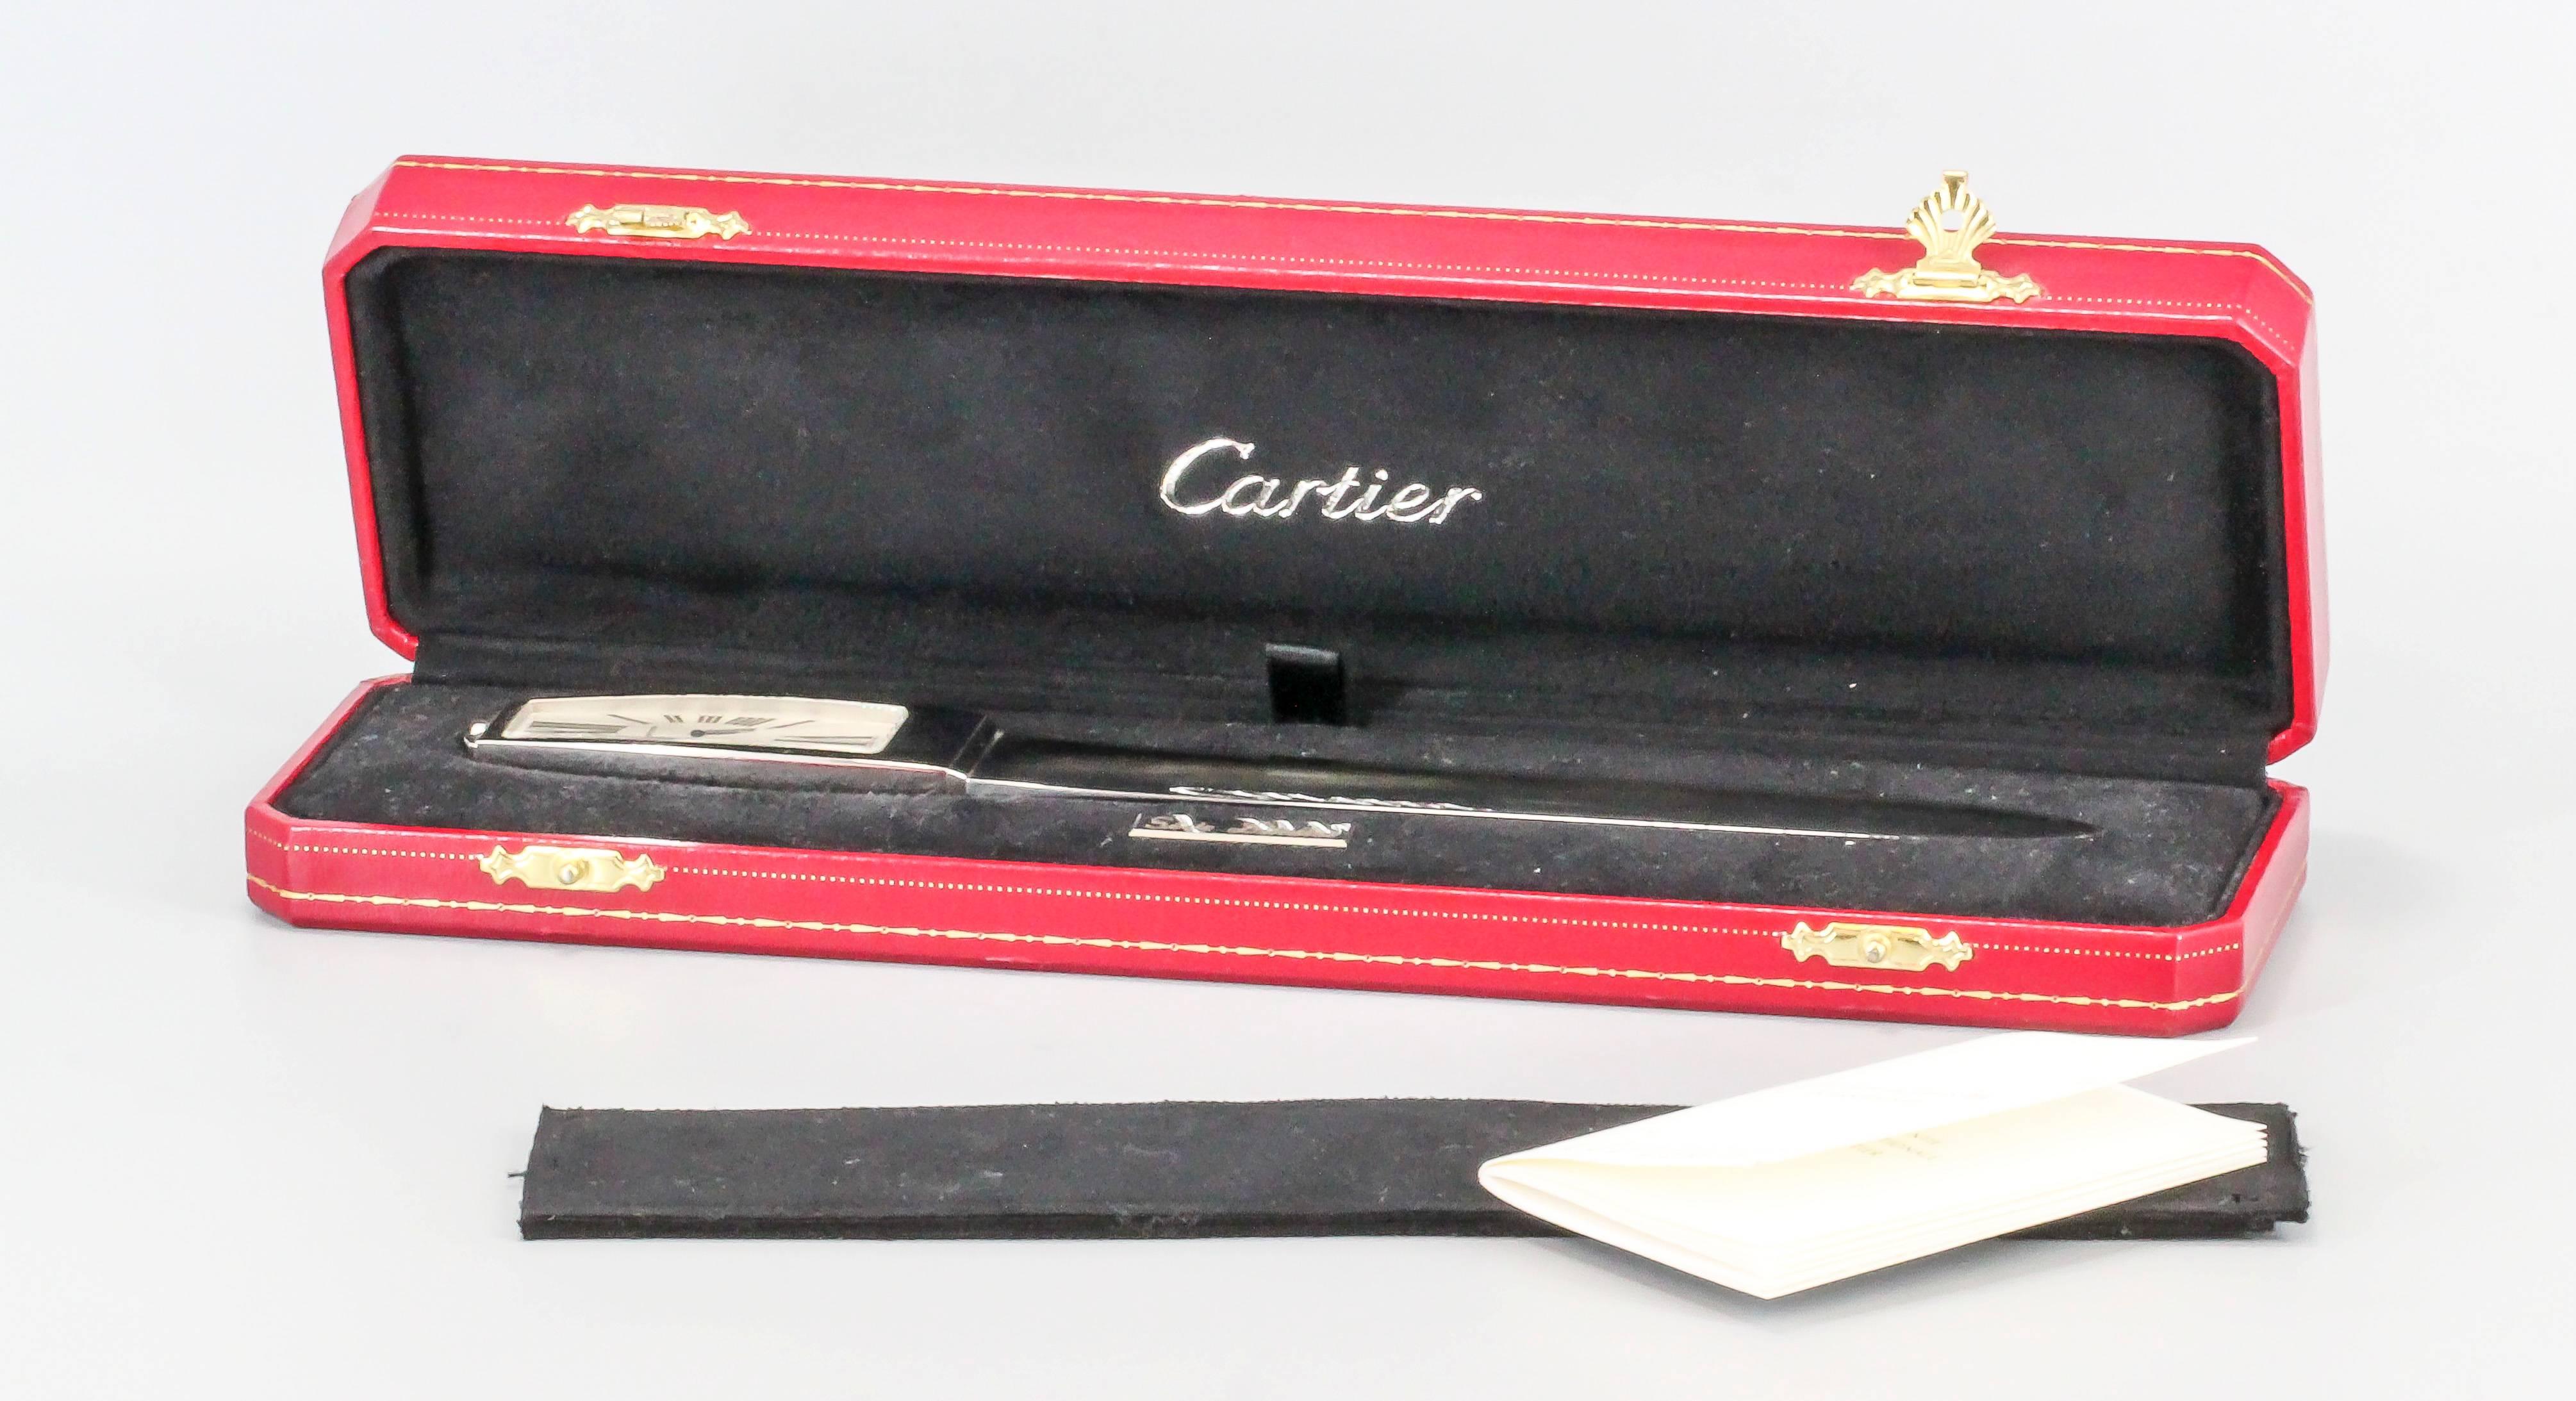 Handsome limited edition (#1396 of 2000 made) clock/letter opener by Cartier. It features a large clock at the end of it, with a quartz movement and roman numerals. Comes with original Cartier box and open papers. Beautifully made and would make a